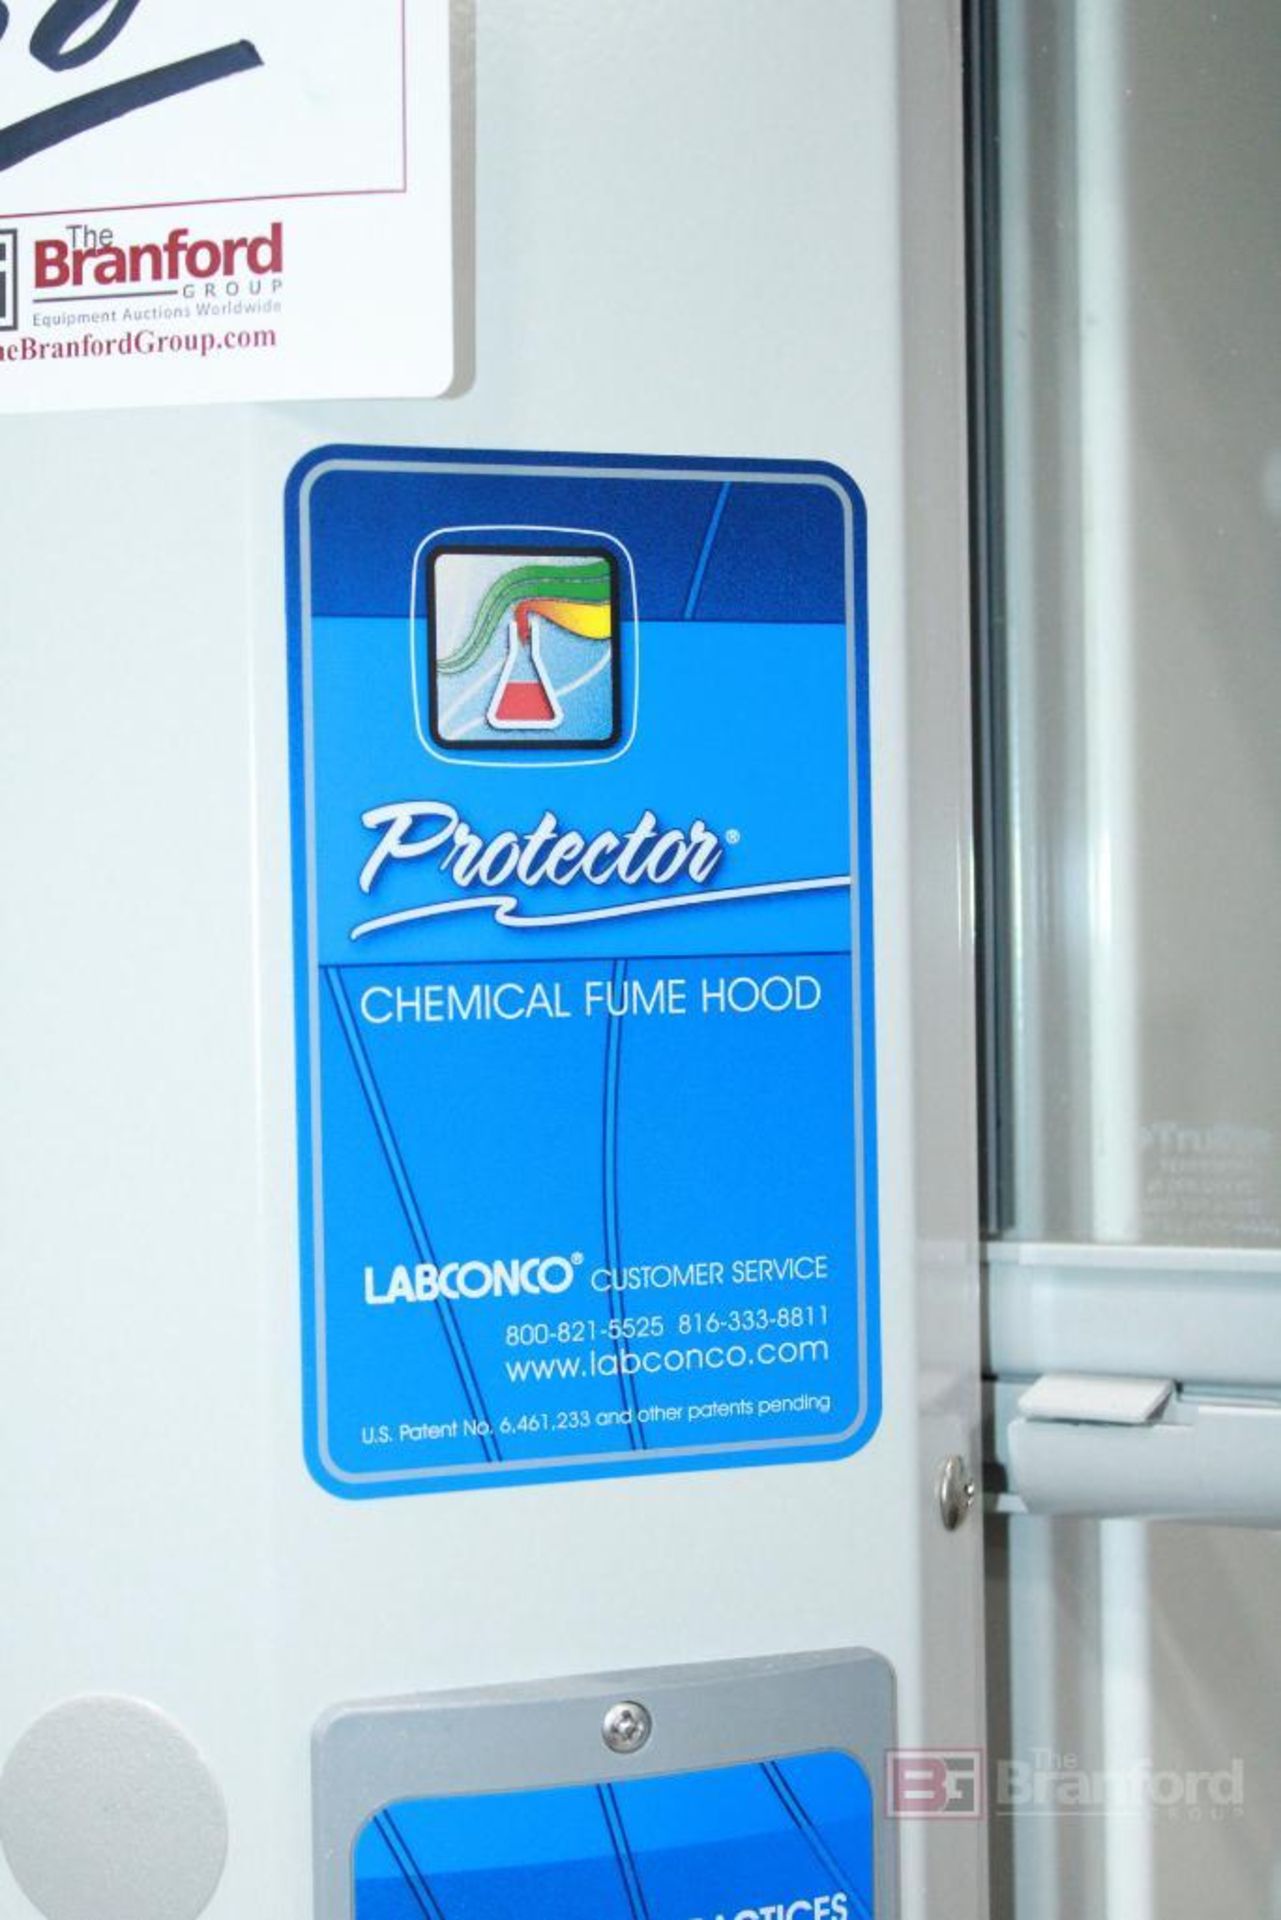 Labconco Premier Chemical Fume Hood & Flammable Cabinet Base - Image 3 of 5